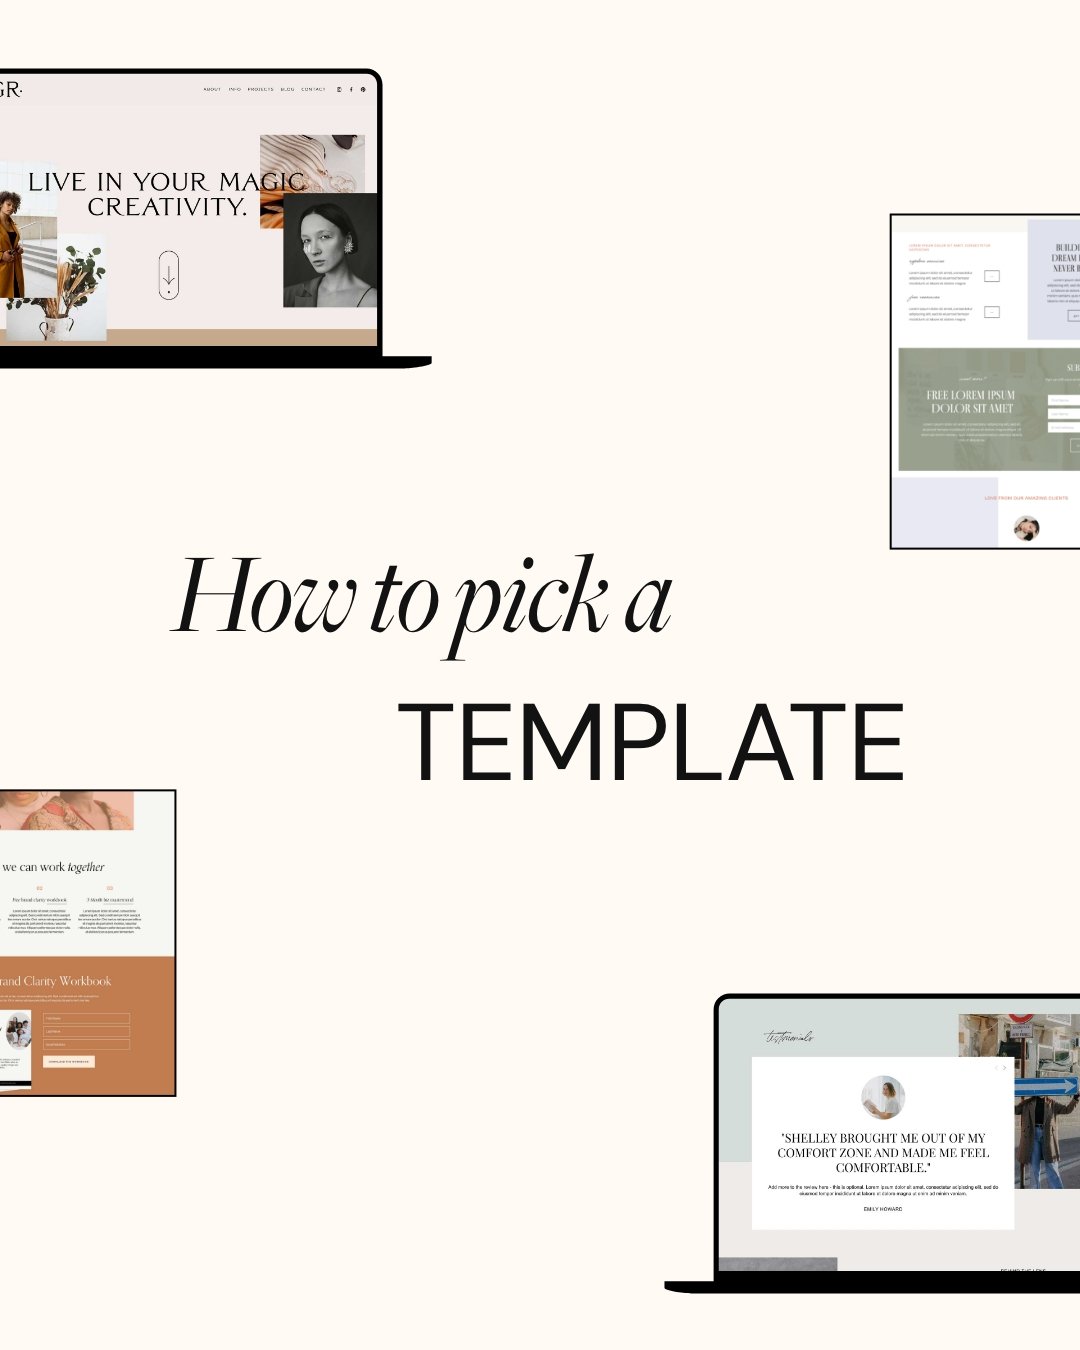 Website templates are an amazing option for small business owners in dire need of a website, providing both ready-made strategic design, and fun creative elements that you may not have thought of adding yourself otherwise! 🌈 

But with so many templ